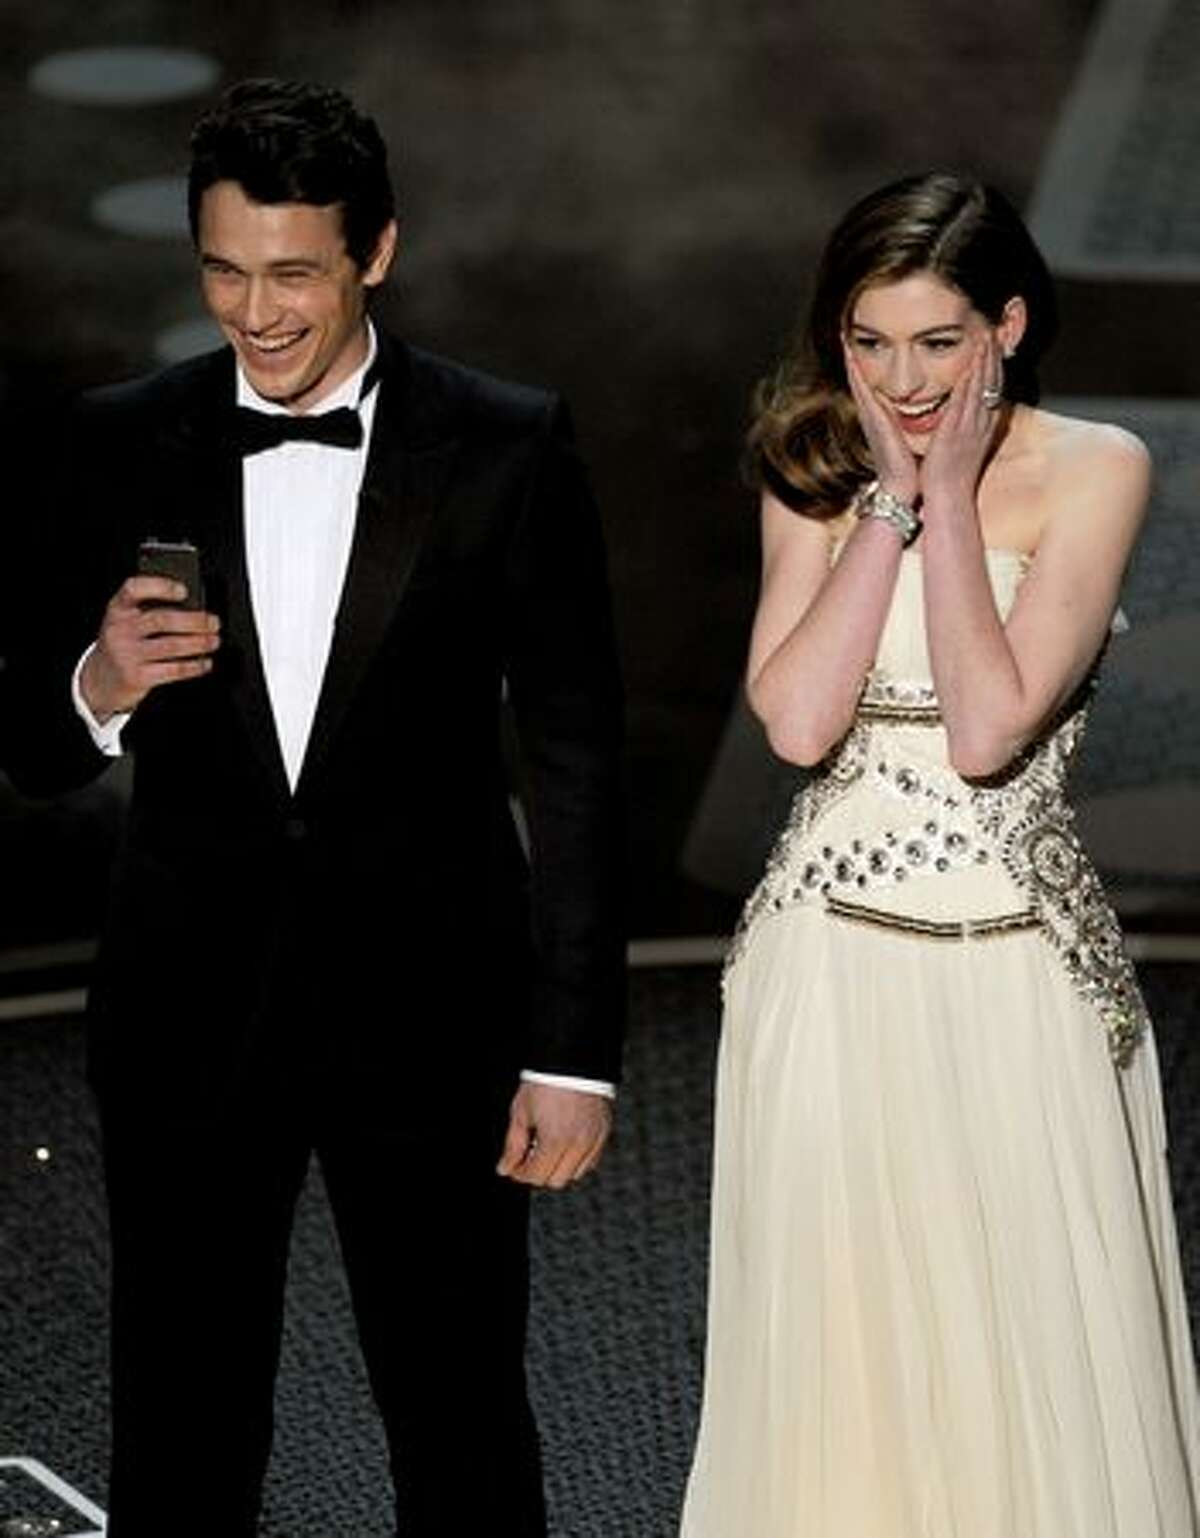 Hosts James Franco and Anne Hathaway speak onstage during the 83rd Annual Academy Awards held at the Kodak Theatre in Hollywood, California.